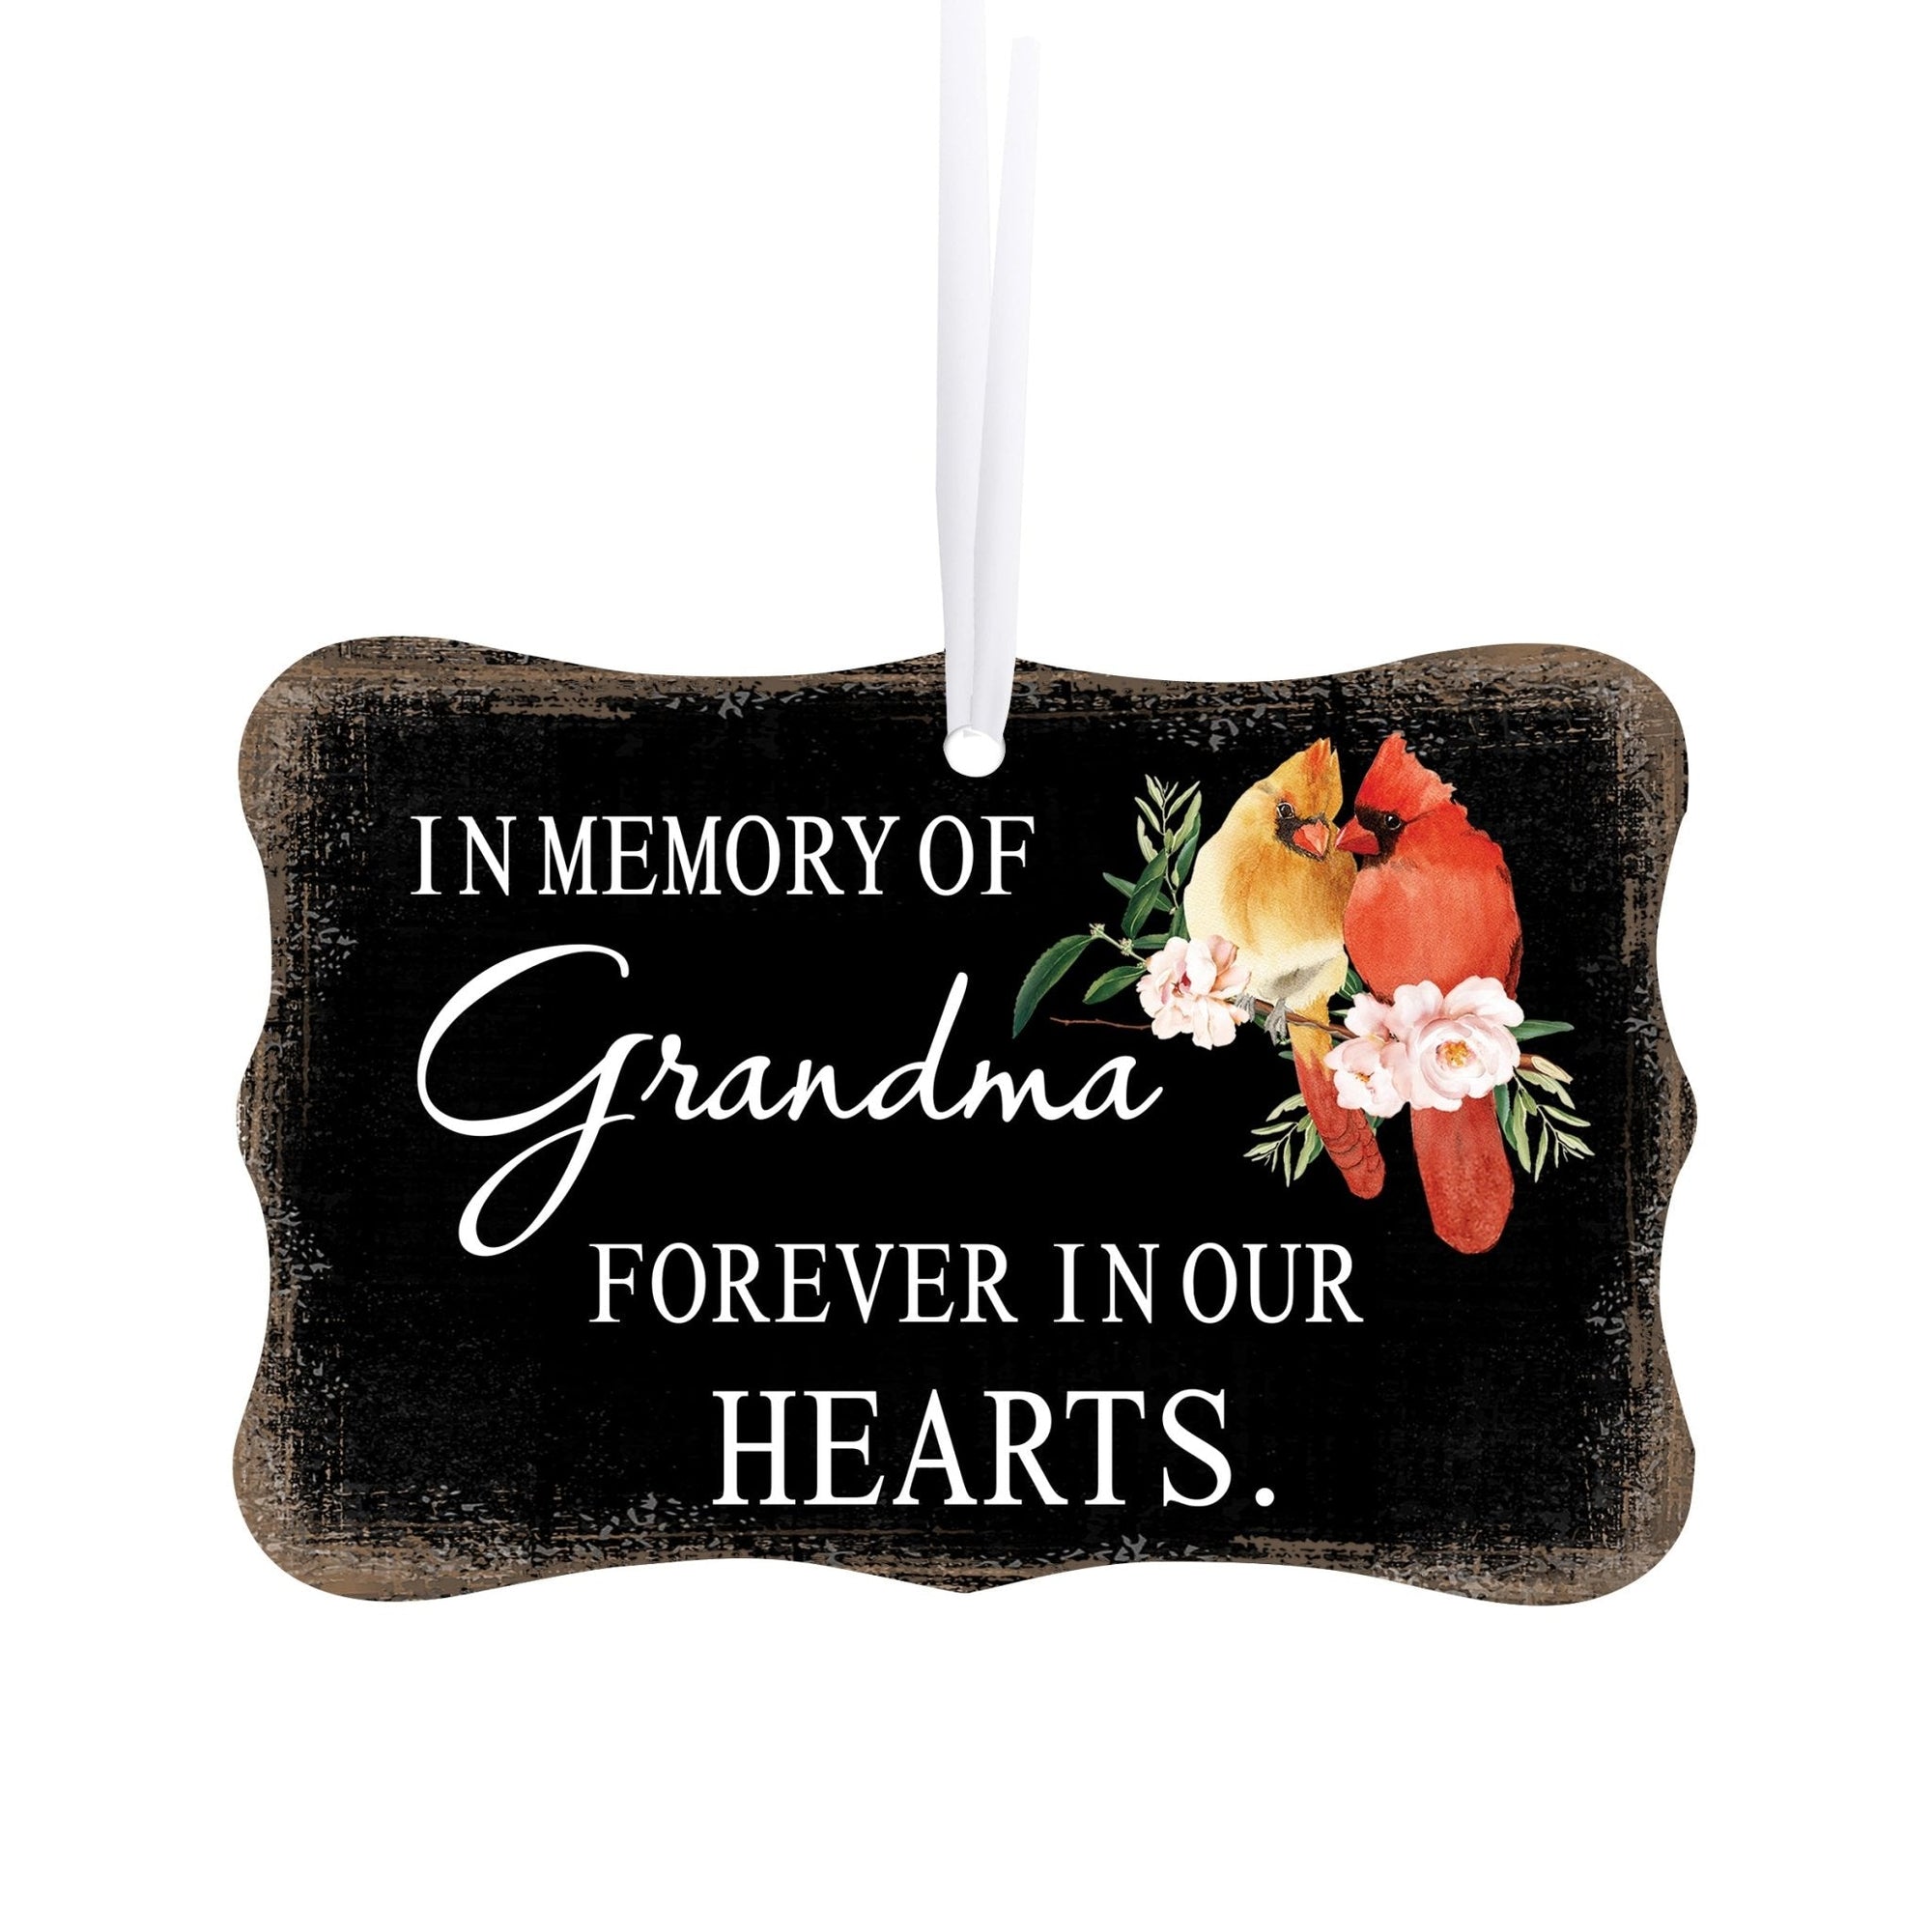 Scalloped ornament signs with heartfelt memorial messages - a beautiful way to honor the memory of a loved one.